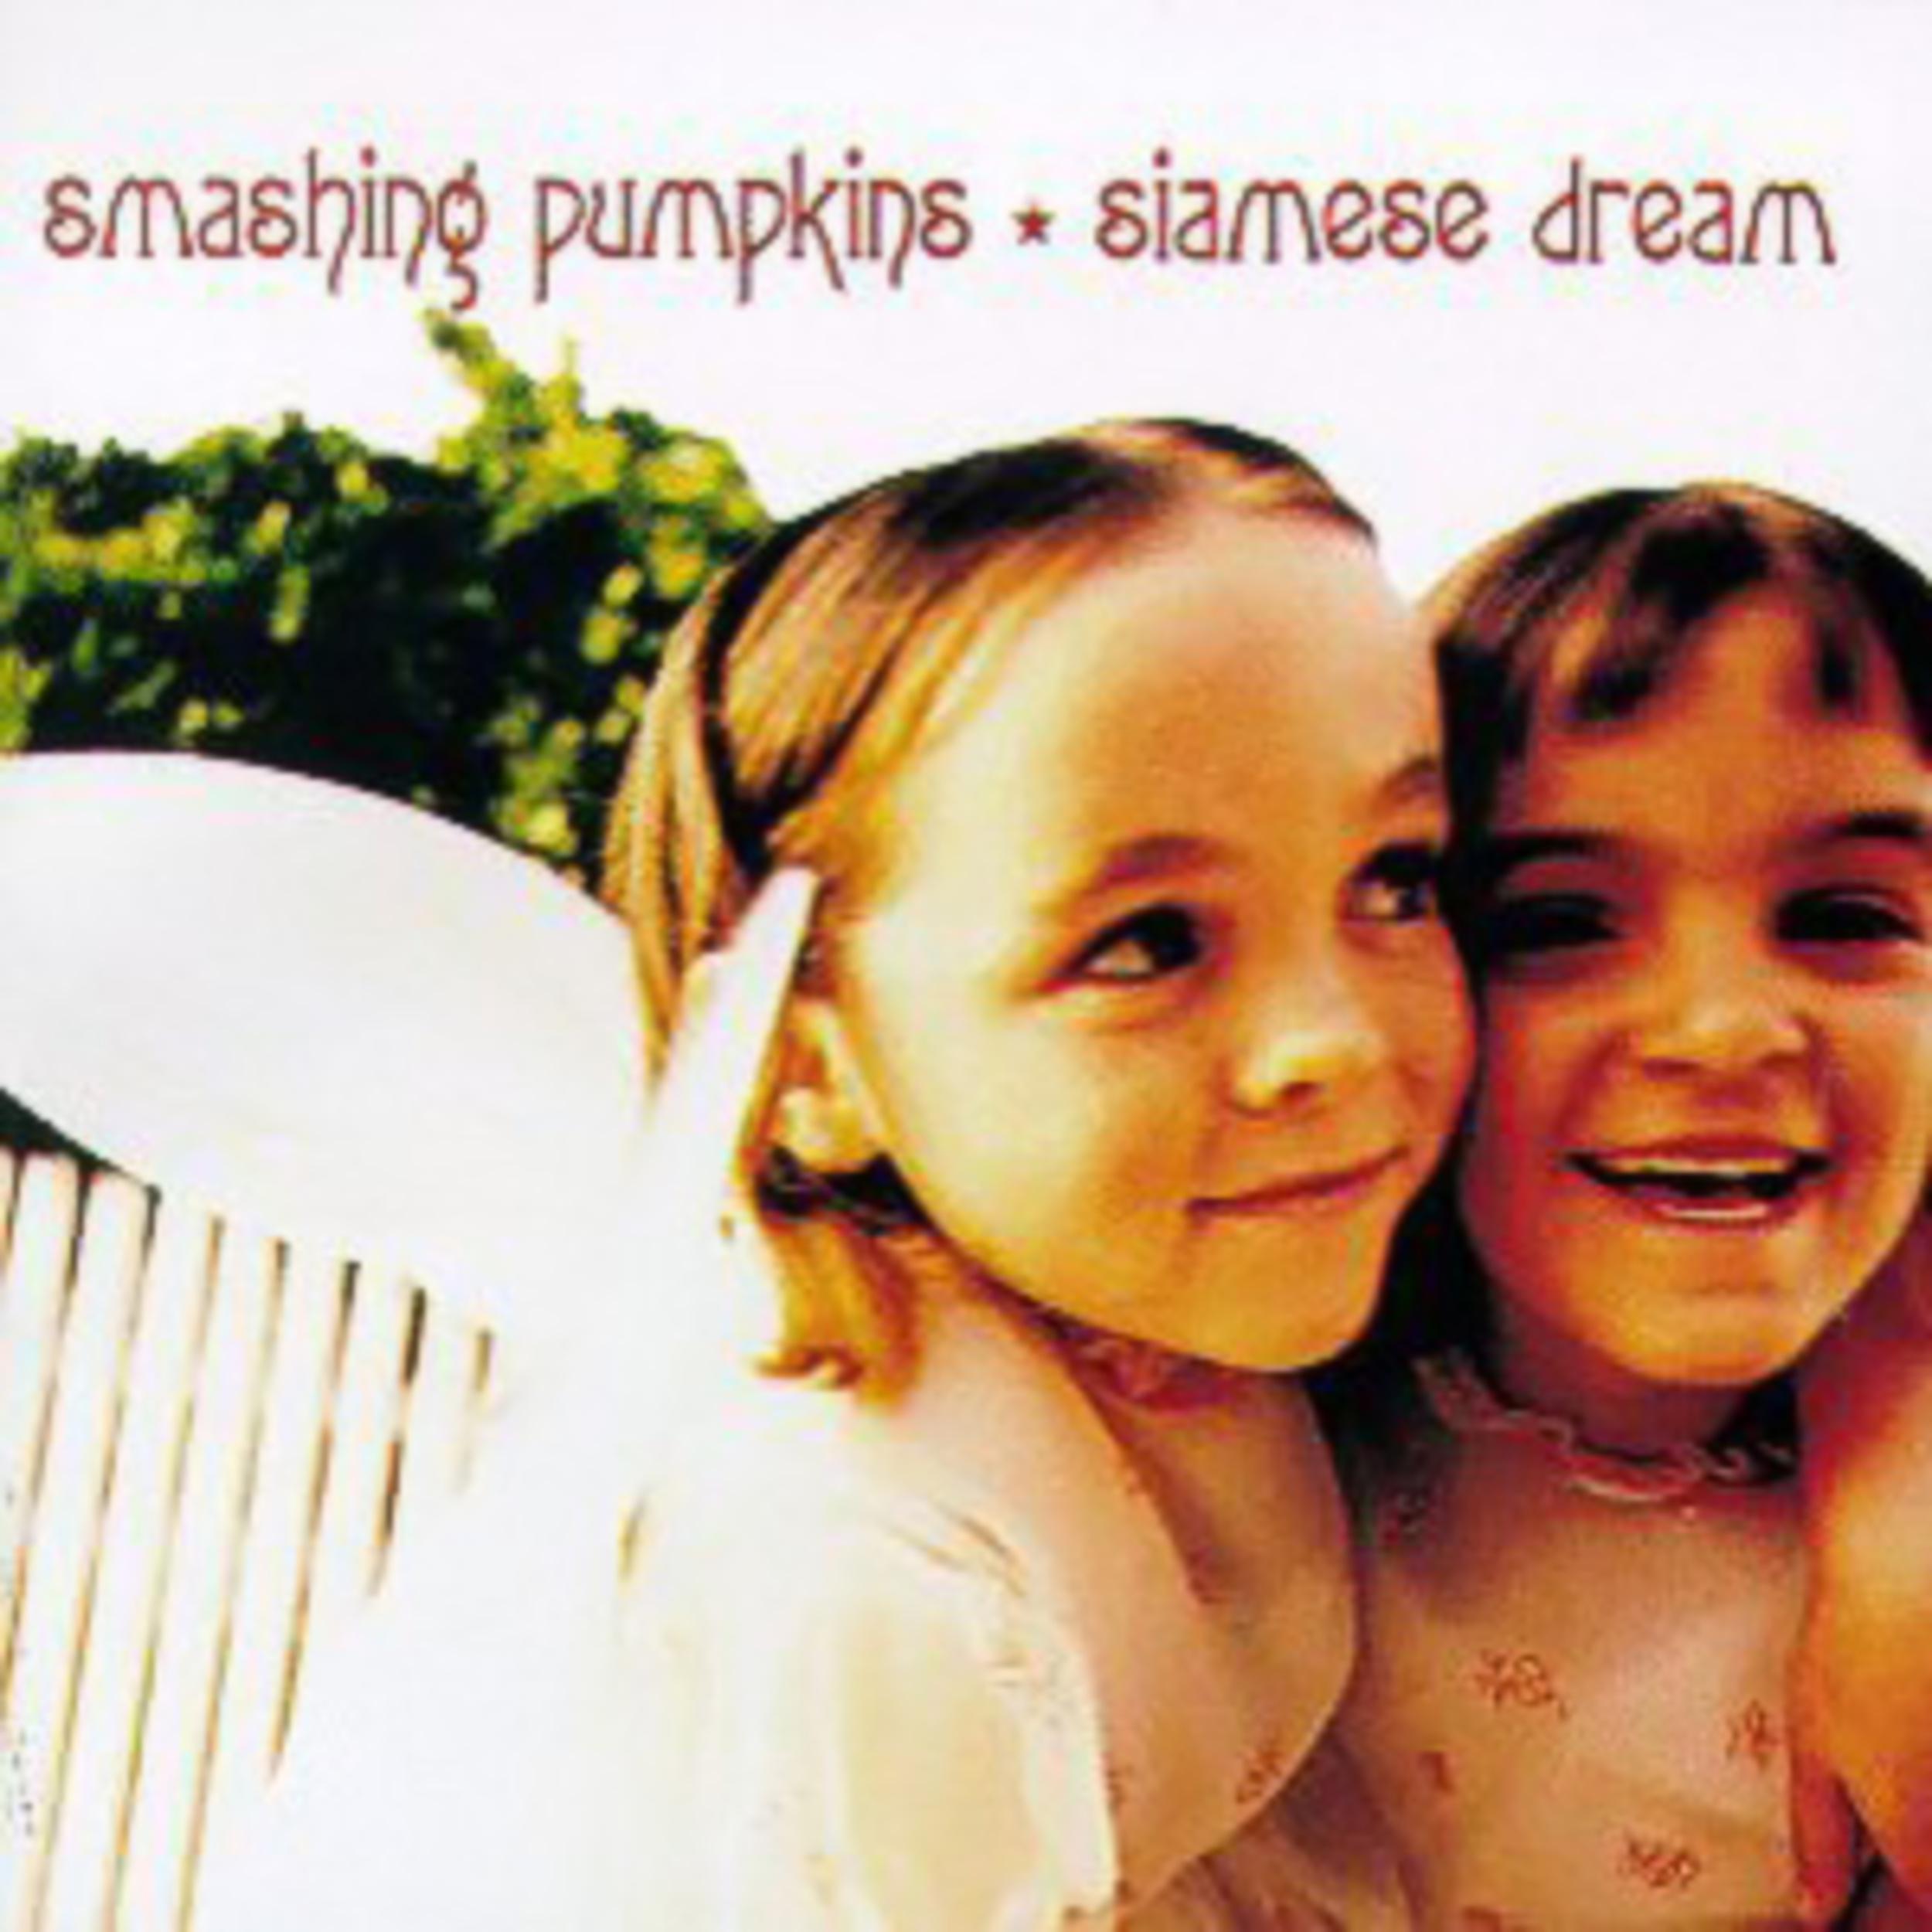 <p>Following the acclaim generated from <em>Gish, </em>the Pumpkins returned in 1993 and released <em>Siamese Dream </em>on Virgin Records<em>.</em> Though the sessions were grueling and Billy Corgan went to almost authoritarian lengths to complete the project, the result was a top-10, four-times platinum offering considered one of the greatest alternative rock records ever recorded. "<a href="https://www.youtube.com/watch?v=xmUZ6nCFNoU">Today</a>" was among the album's commercial hits. And though it has an upbeat tempo, it's one of the band's darker tunes.</p><p><a href='https://www.msn.com/en-us/community/channel/vid-cj9pqbr0vn9in2b6ddcd8sfgpfq6x6utp44fssrv6mc2gtybw0us'>Follow us on MSN to see more of our exclusive entertainment content.</a></p>